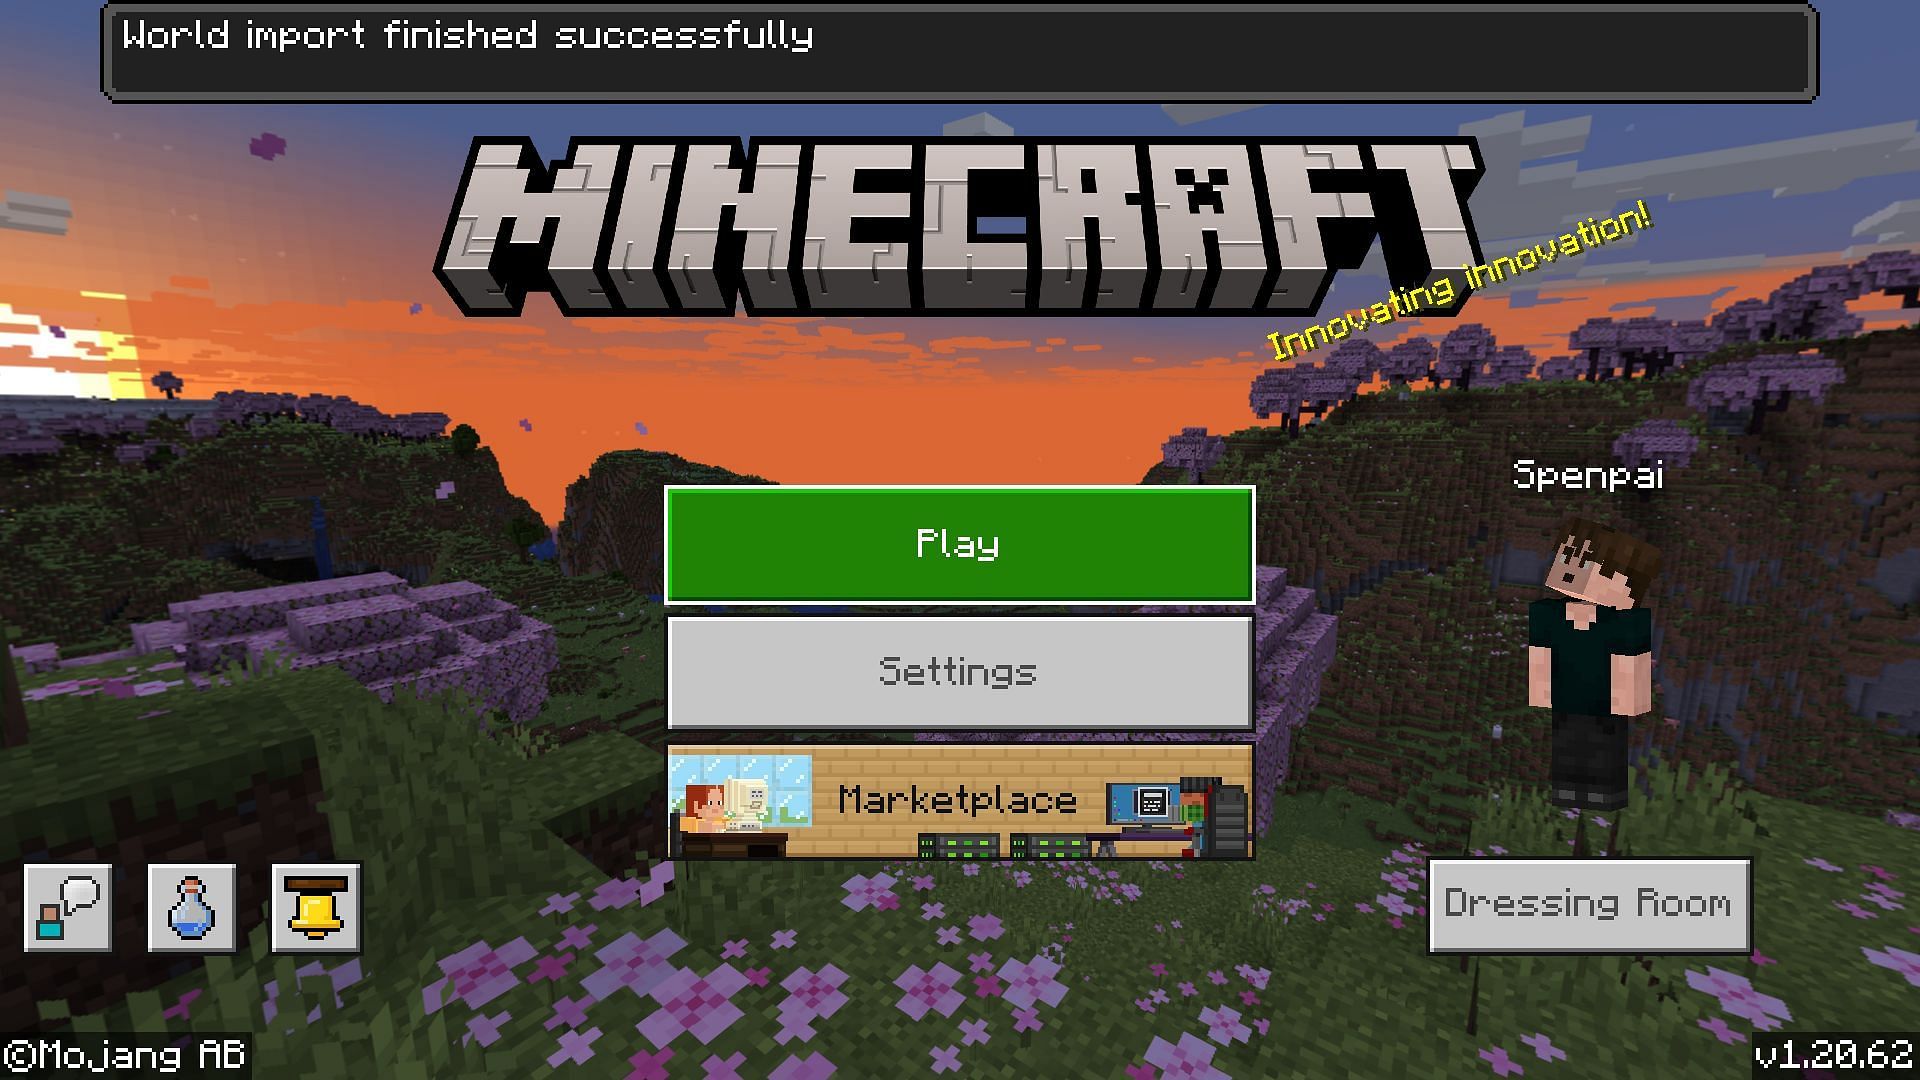 Opening an .mcpack file in Bedrock will provide a message that it has been imported successfully. (Image via Mojang)